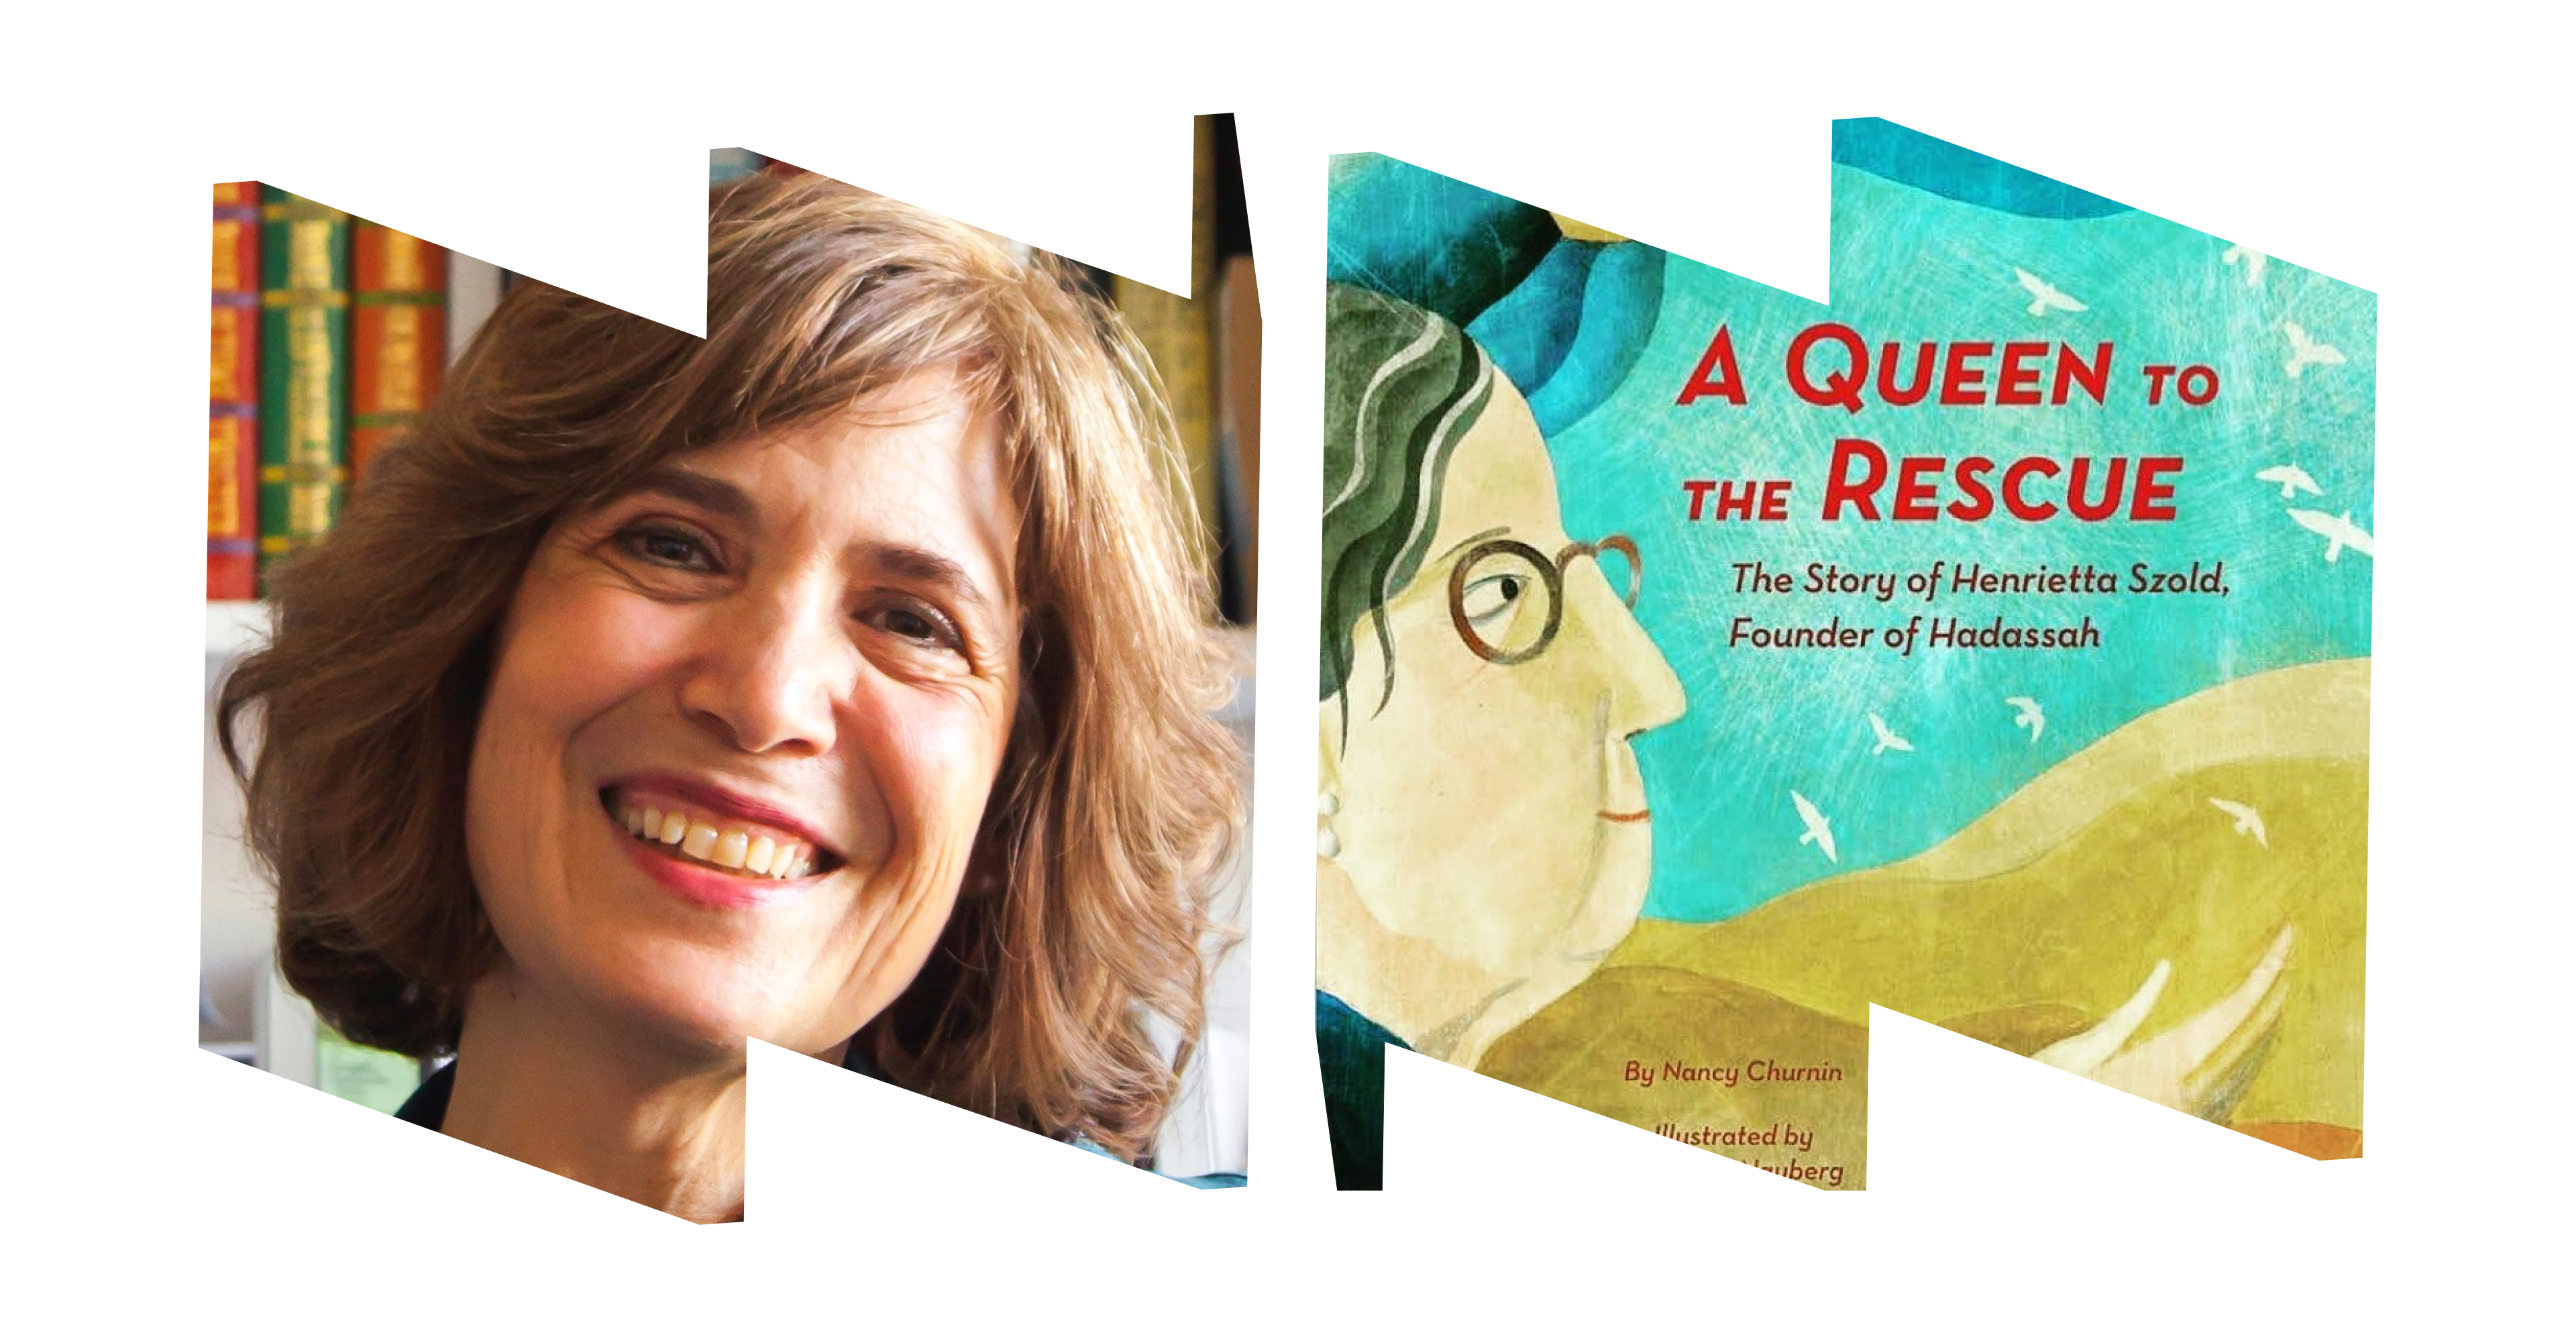 Image of author Nancy Churnin (left) and the cover of the book A Queen to the Rescue (right).